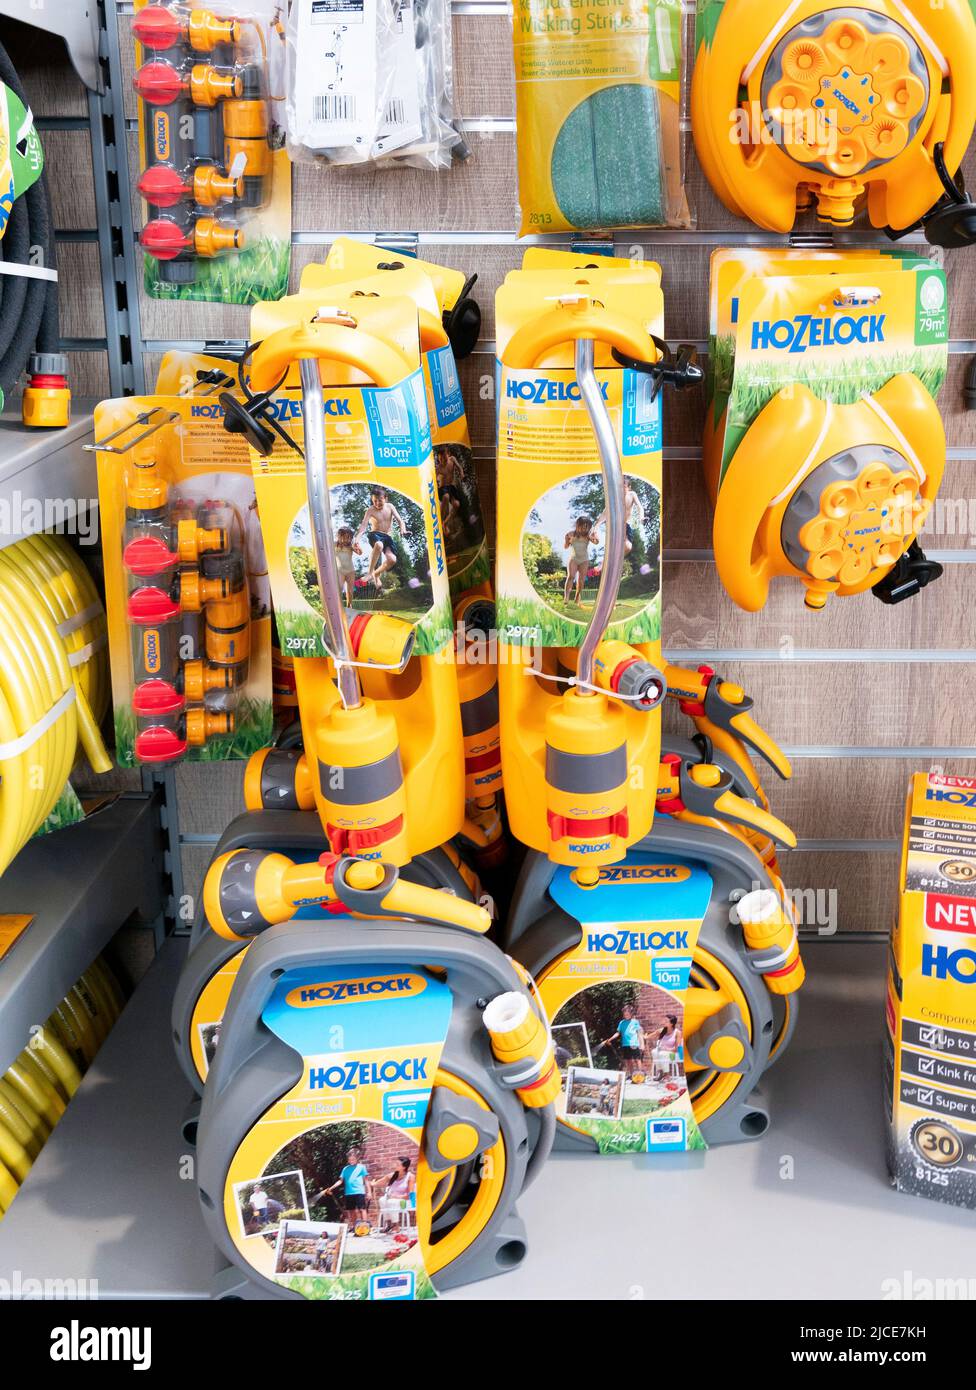 Display of Hozelok proprietary hose fittings on display in a garden centre Stock Photo